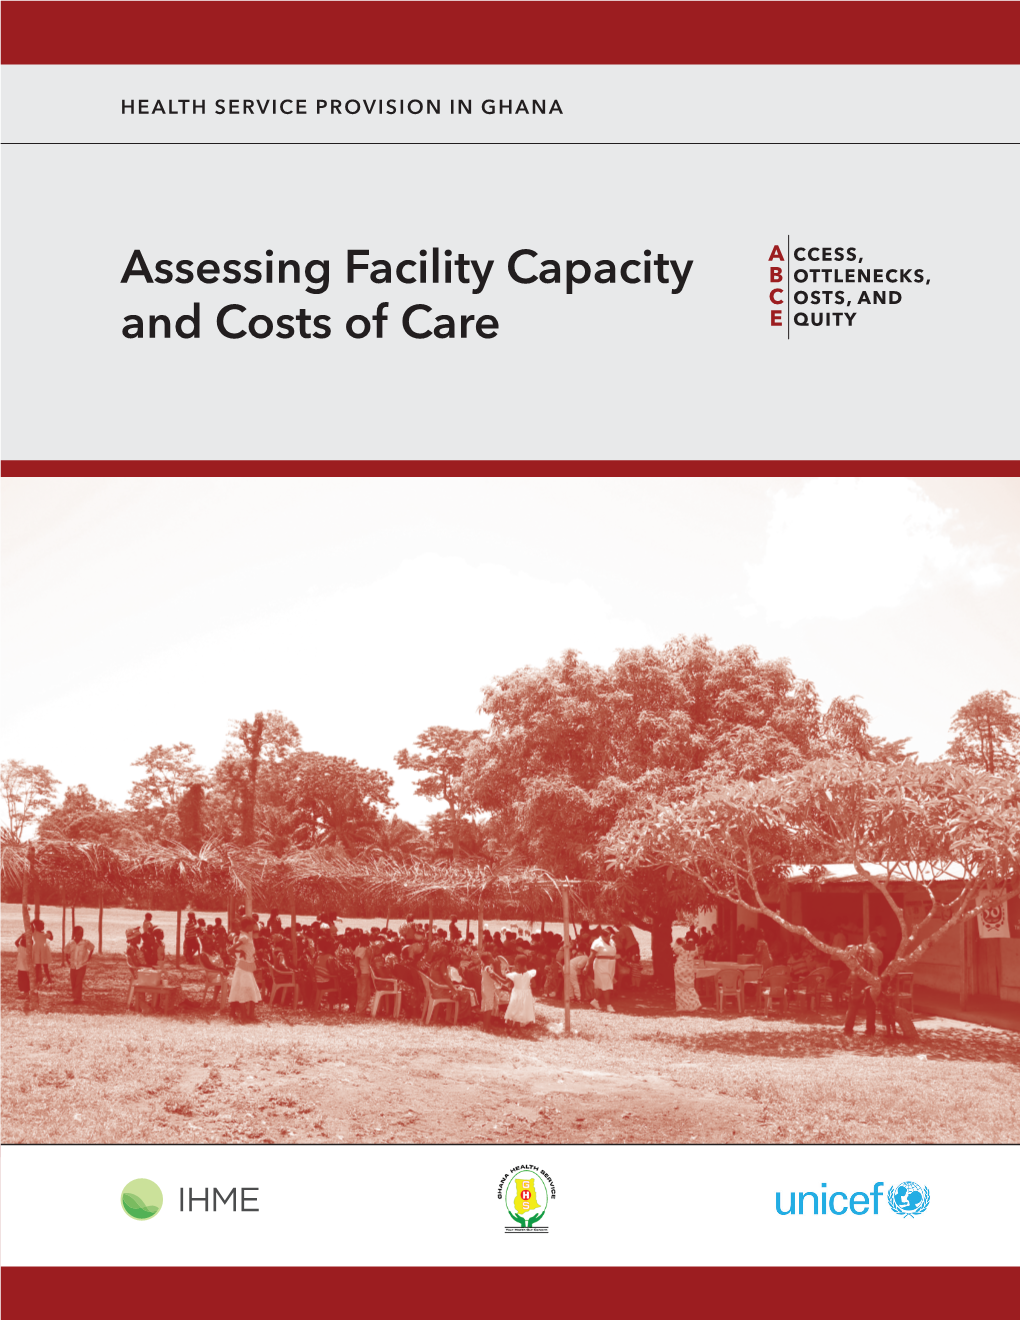 Assessing Facility Capacity and Costs of Care